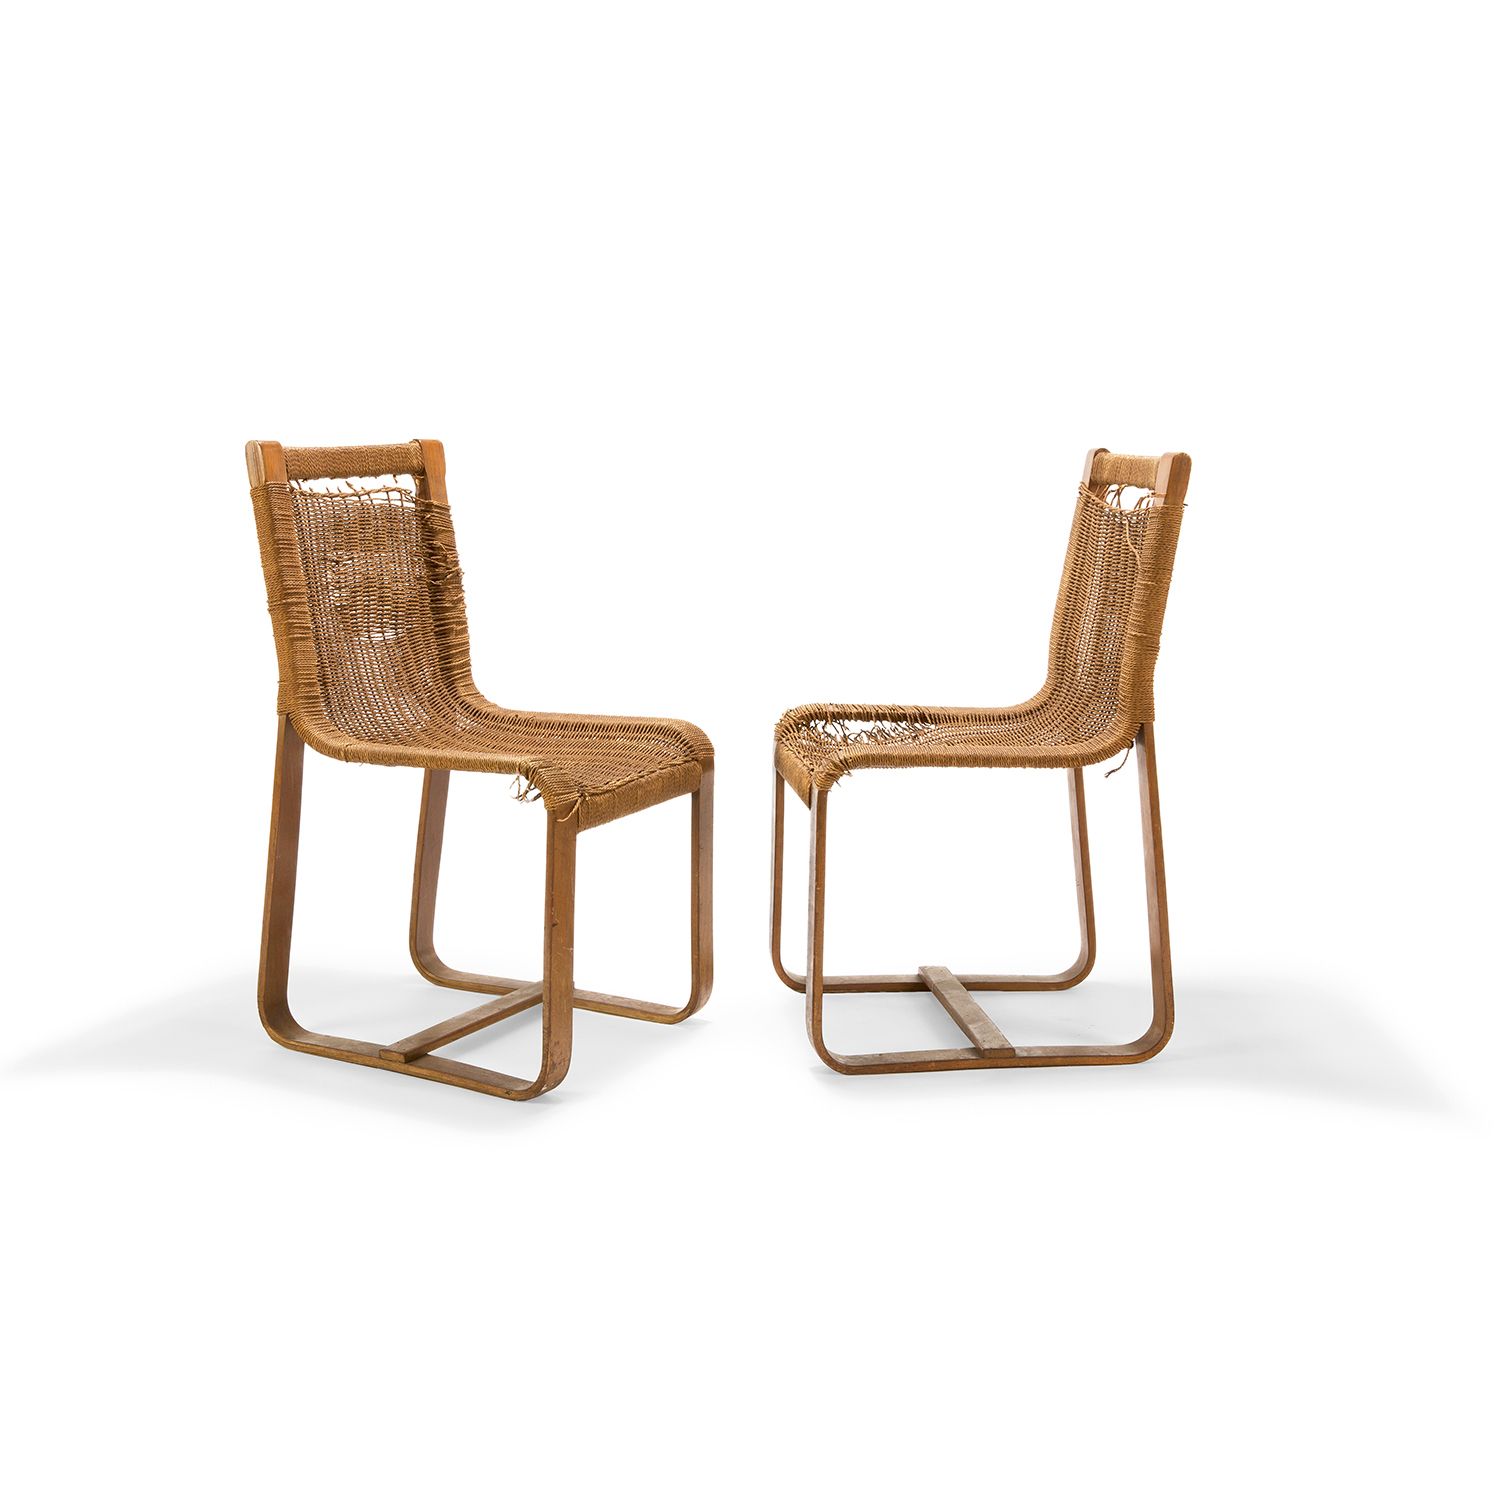 Null GIUSEPPE PAGANO (1896-1945)

Pair of chairs with thermoformed walnut plywoo&hellip;